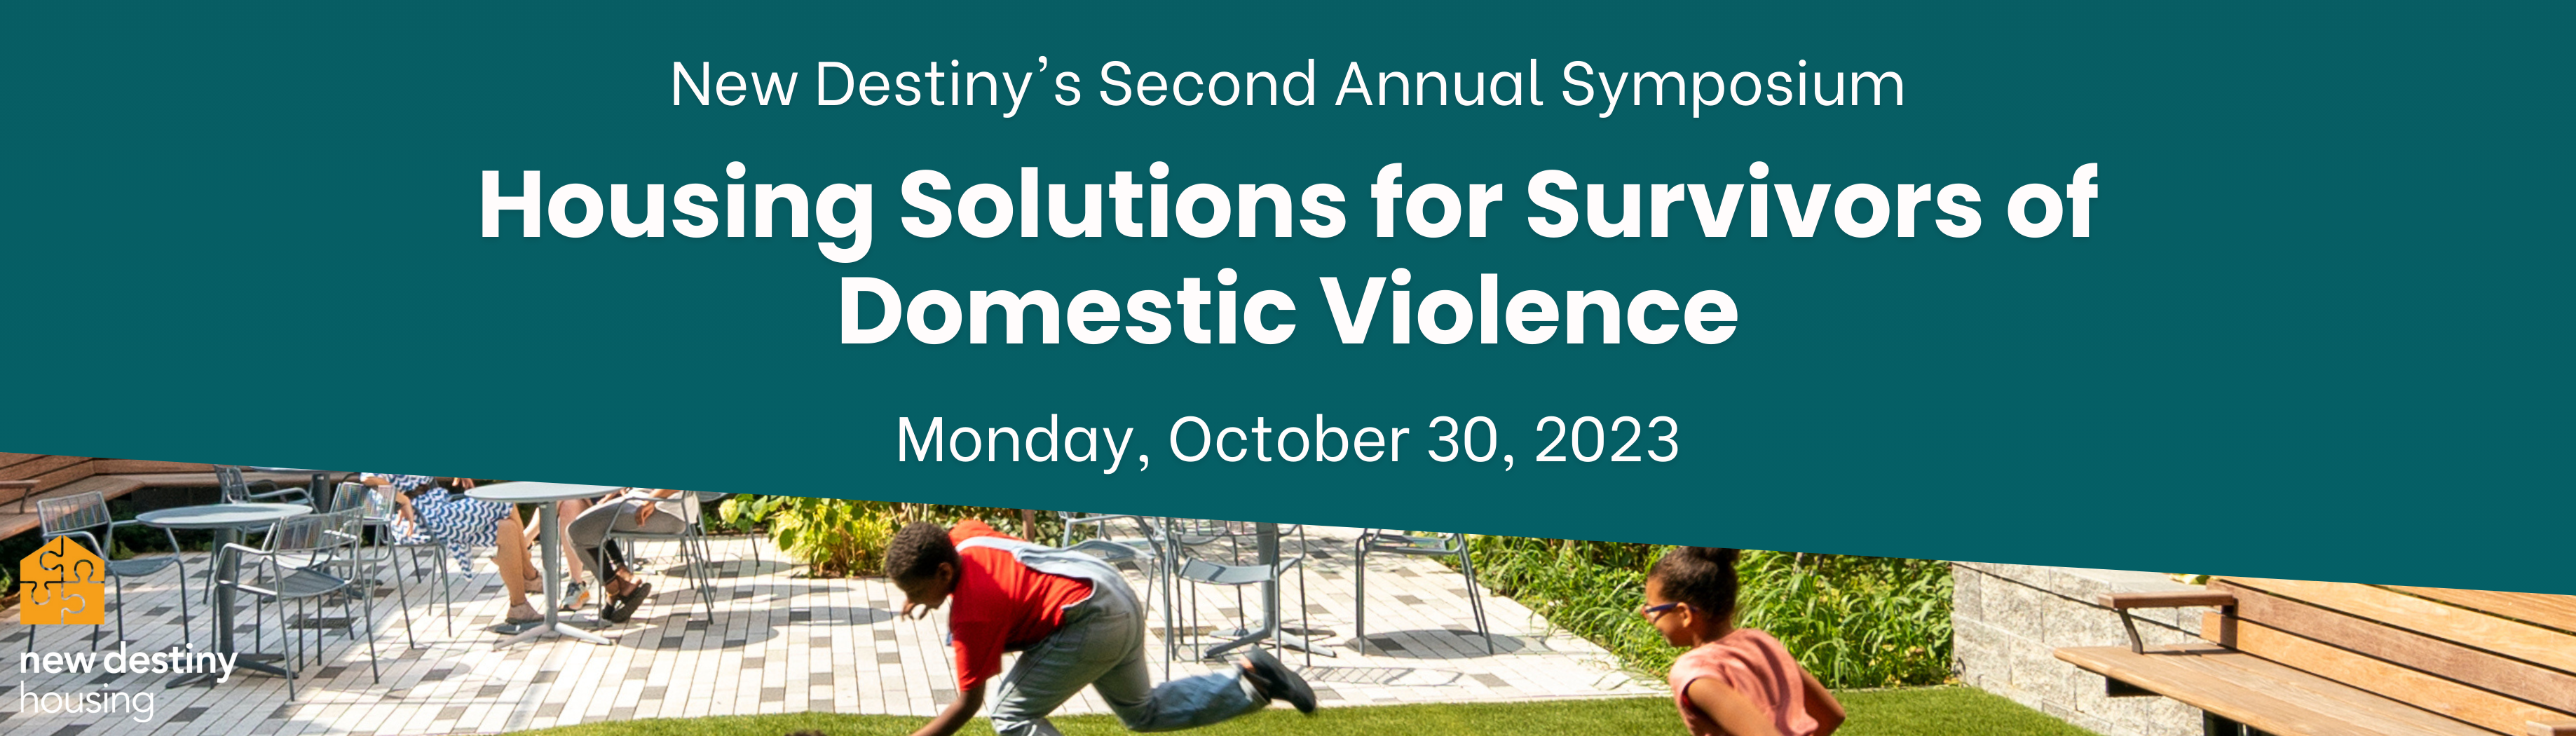 New Destiny's Second Annual Symposium: Housing Solutions for Survivors of Domestic Violence. Monday, October 30, 2023.